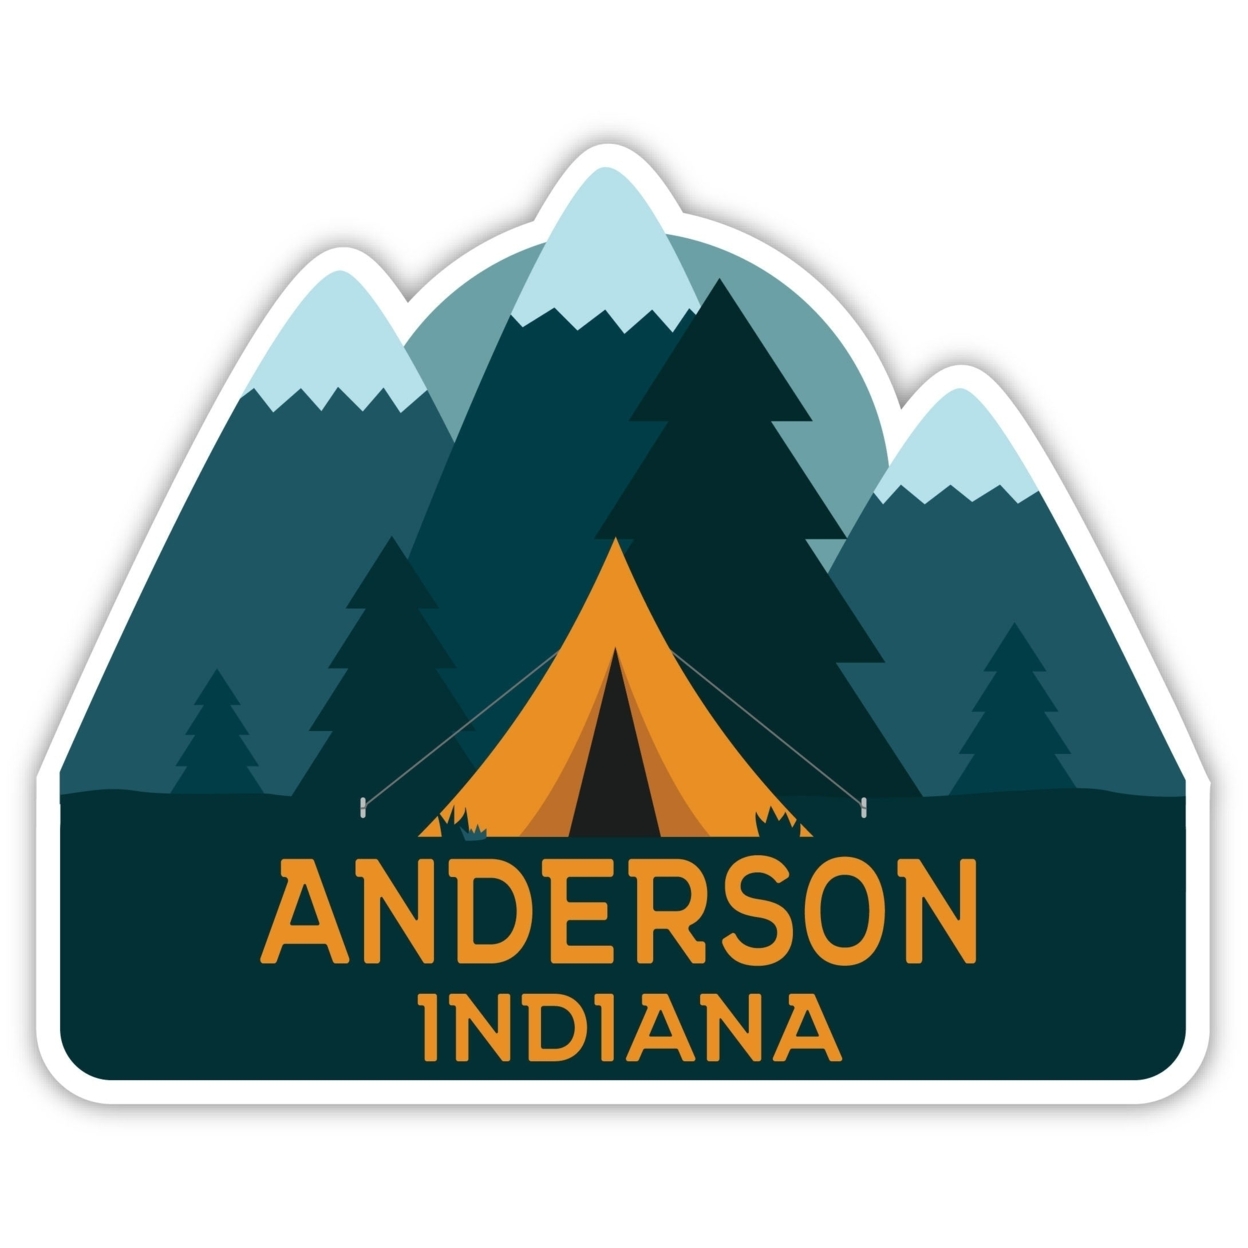 Anderson Indiana Souvenir Decorative Stickers (Choose Theme And Size) - 4-Pack, 4-Inch, Tent